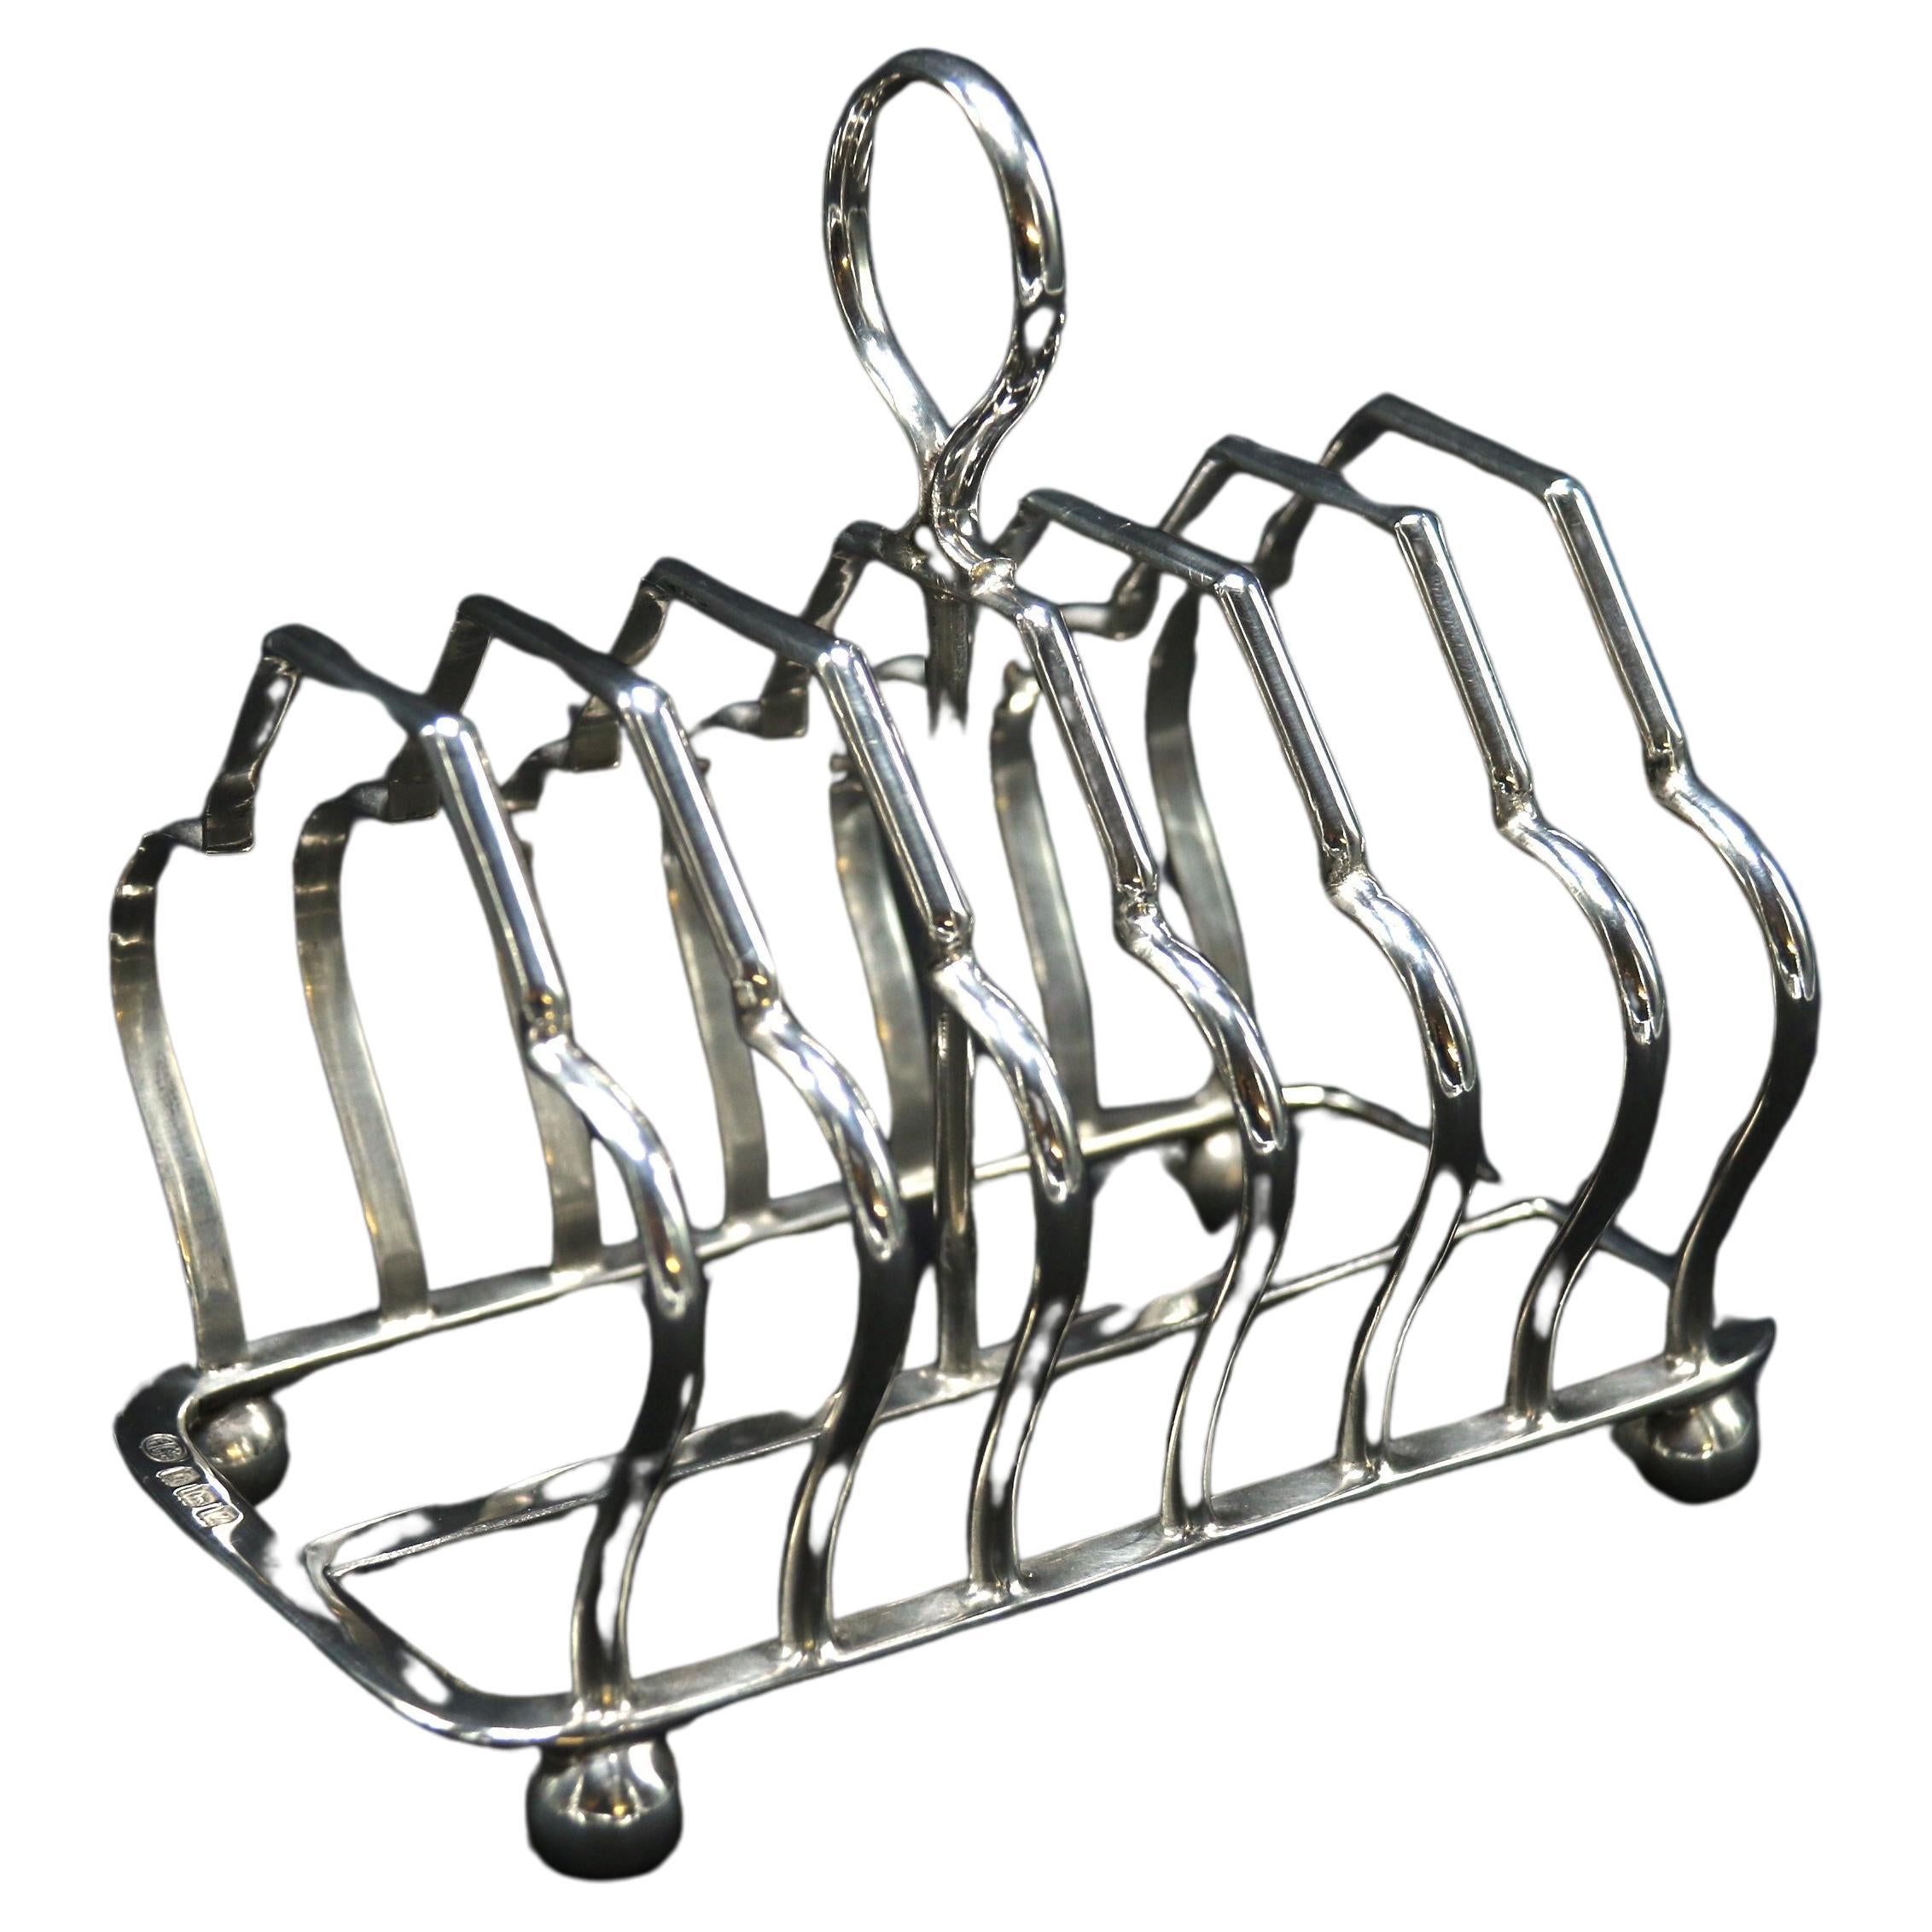 An English heavy solid silver toast rack of larger proportions 1924 - 1925